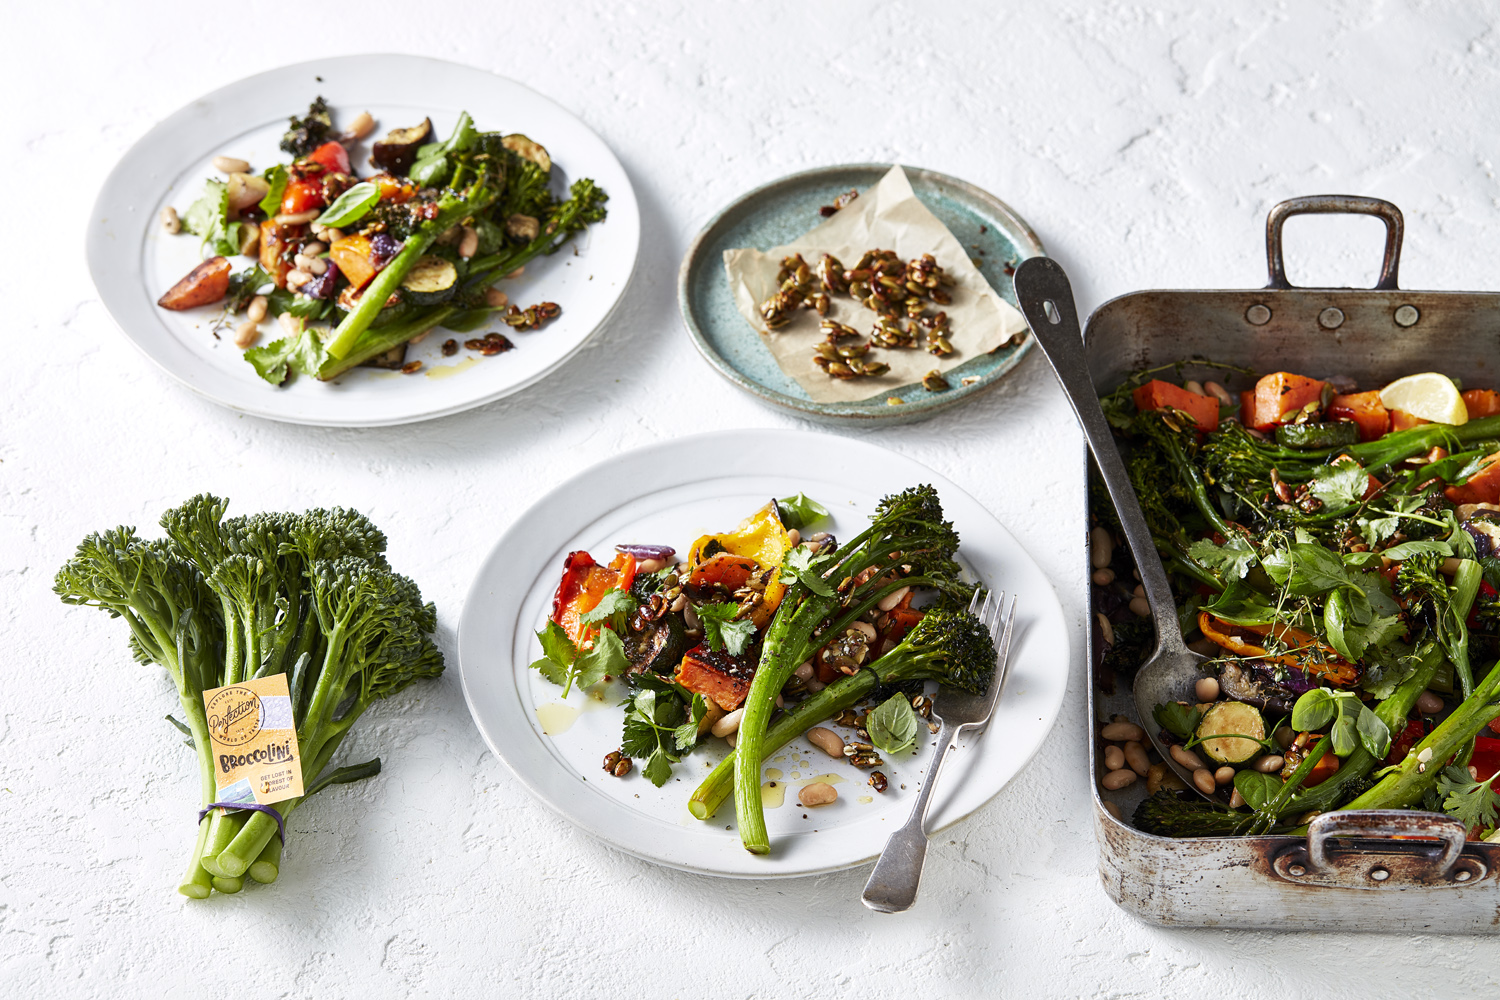 Oven Baked Broccolini And White Bean Salad Tray Bake Recipe